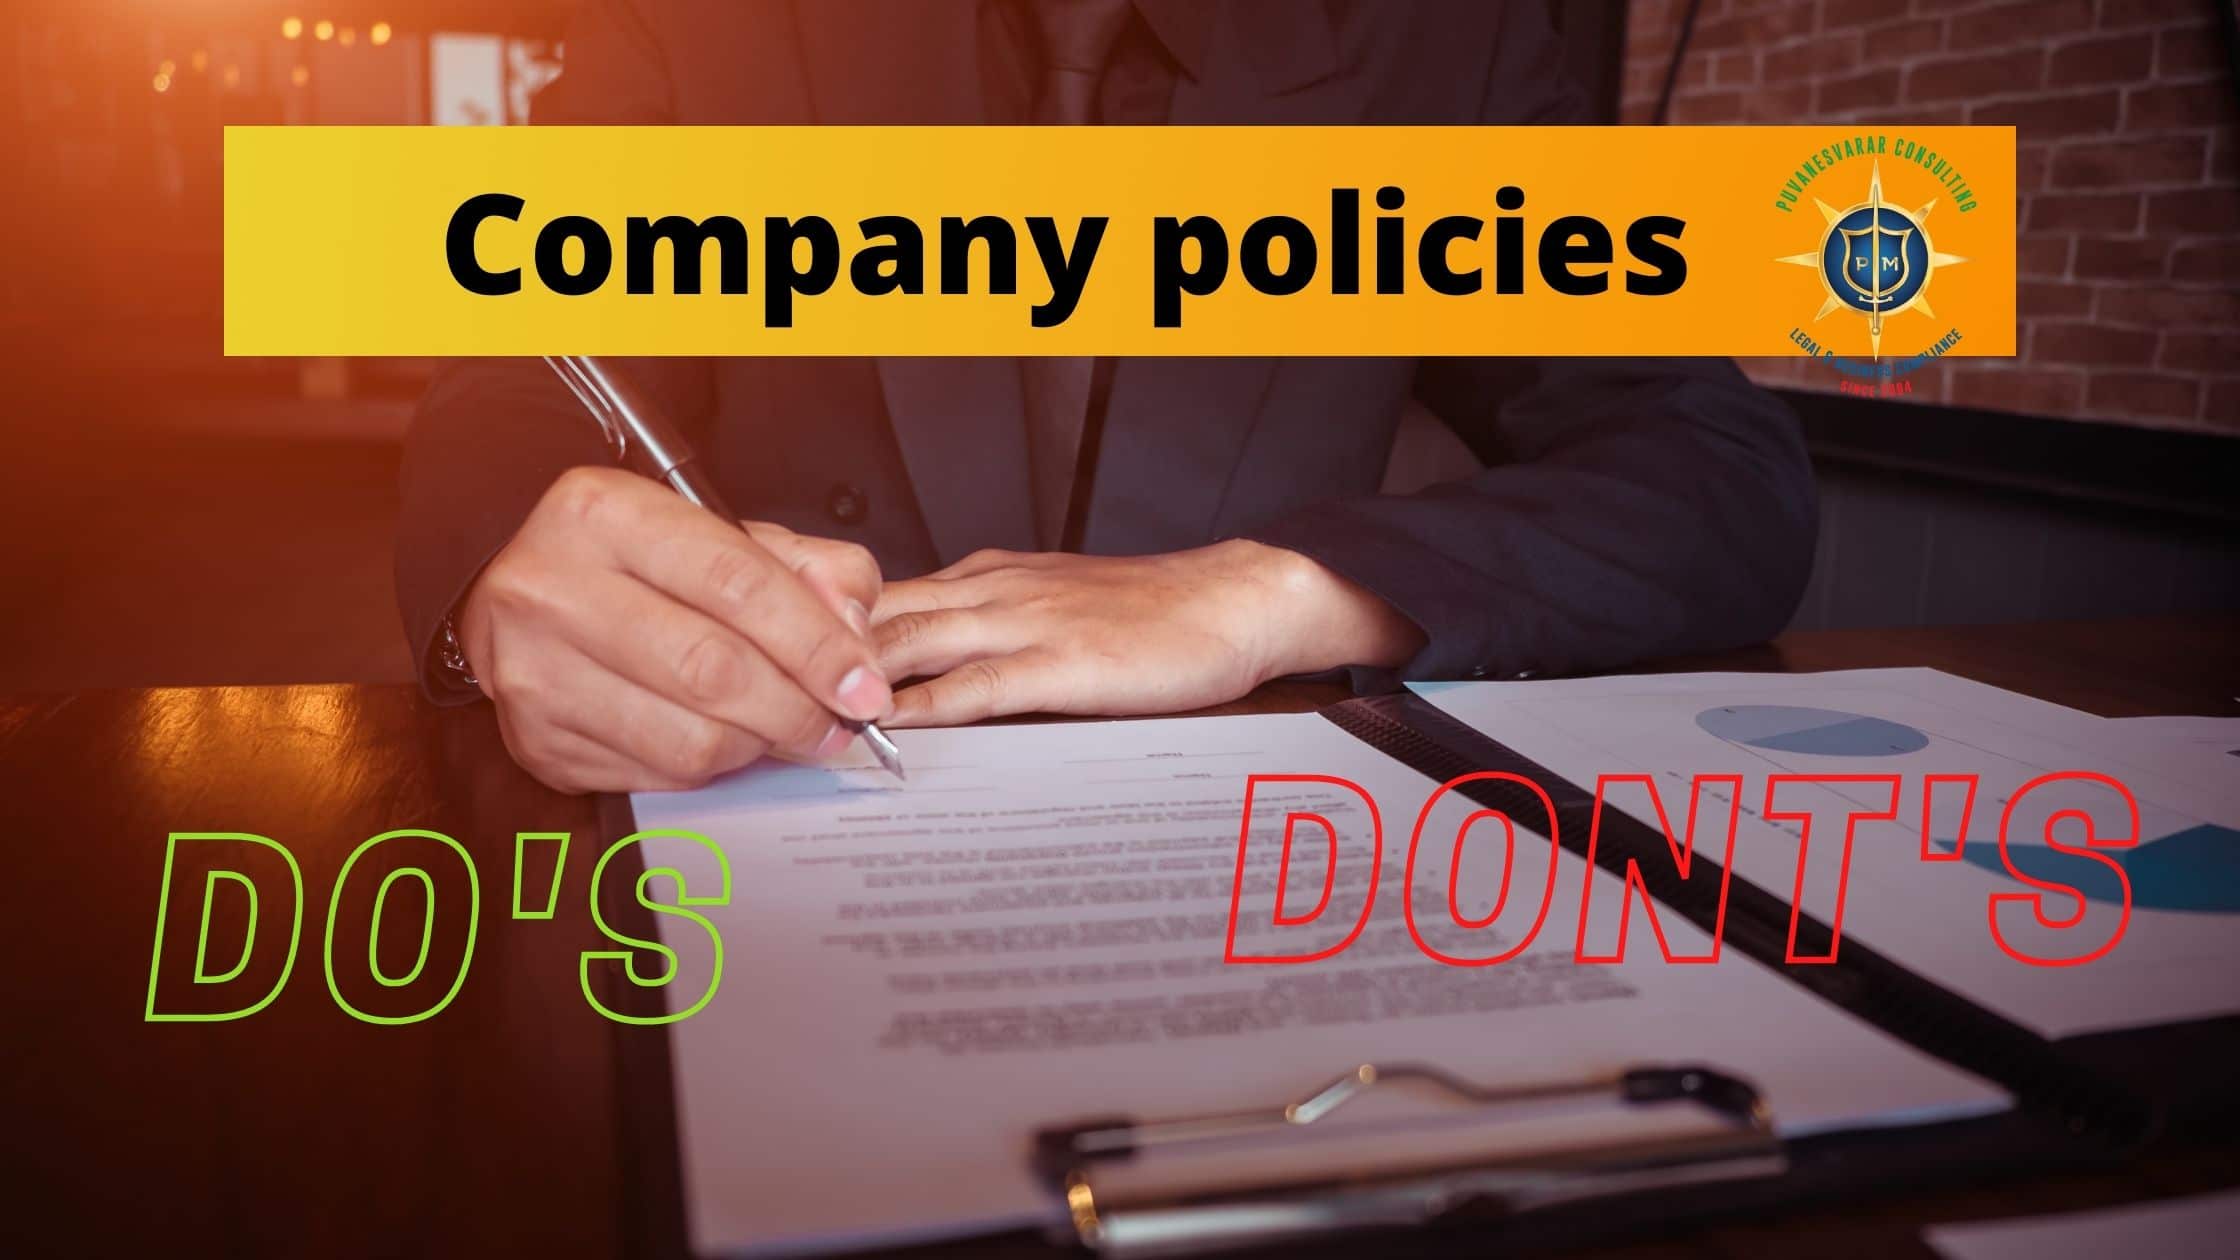 policies for a company